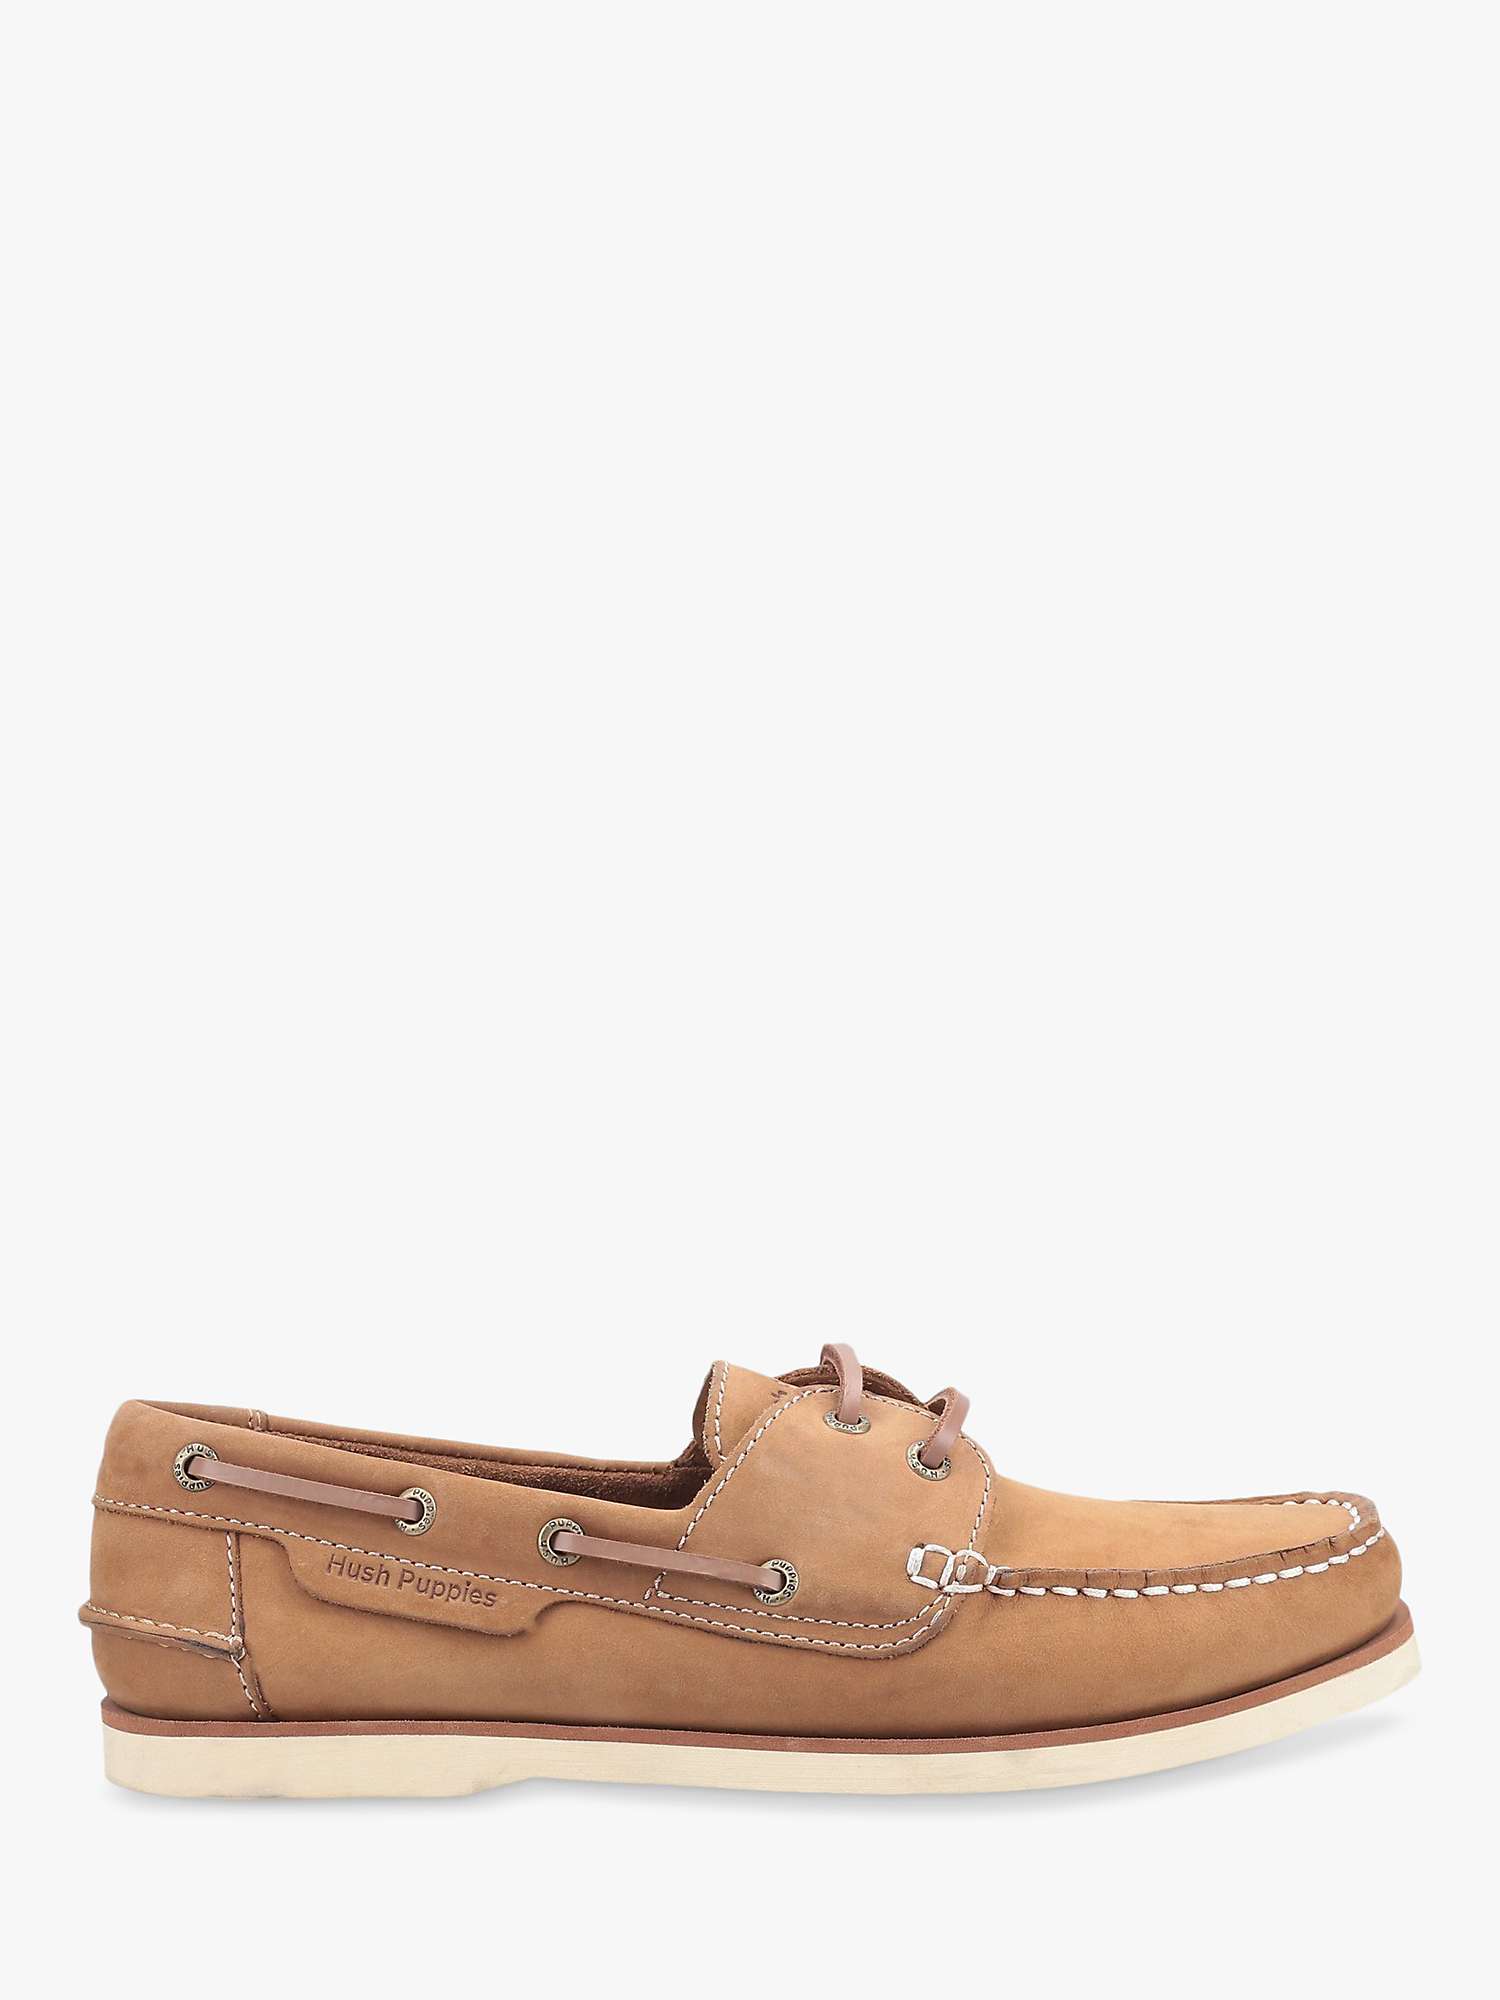 Hush Puppies Henry Leather Boat Shoe, Chesnut at John Lewis & Partners